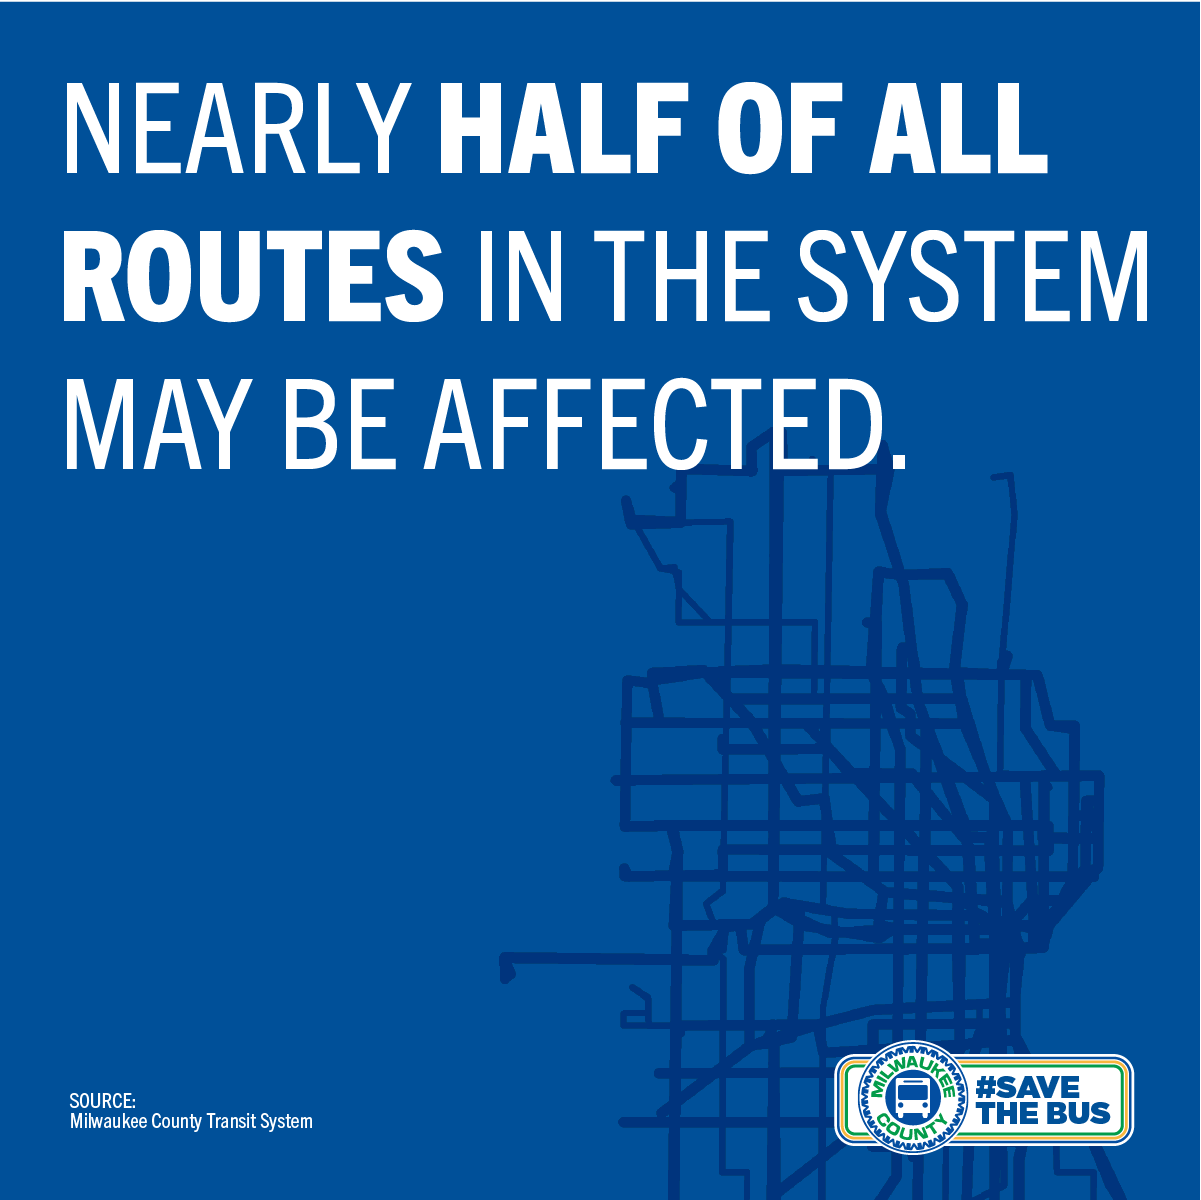 Nearly half of all routes in the system may be affected.